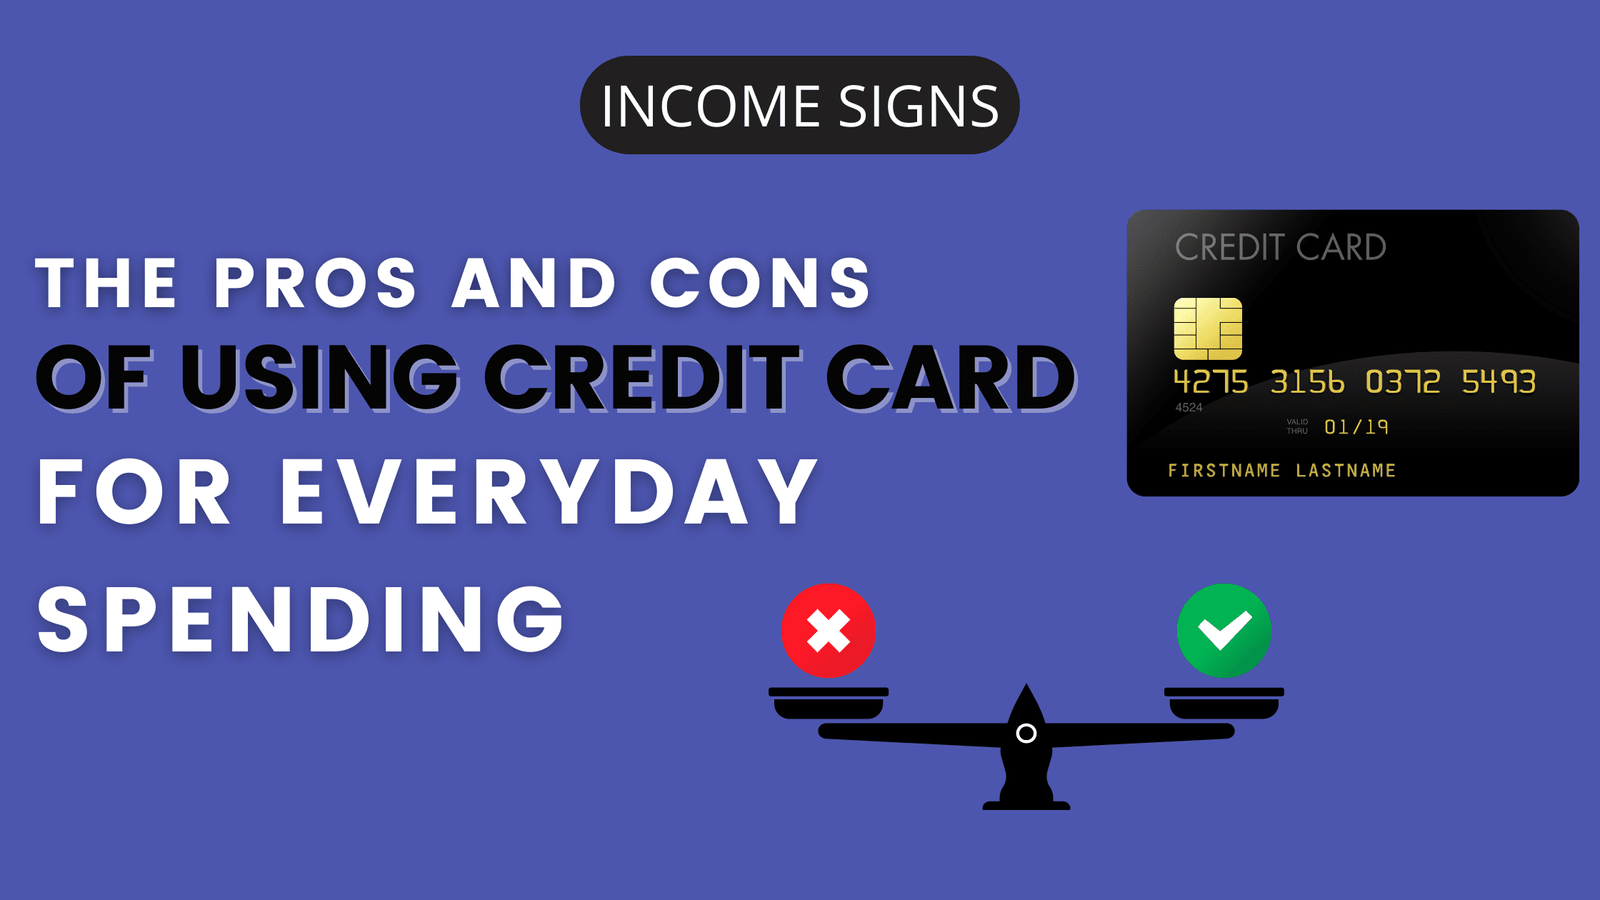 The Pros and Cons of Using a Credit Card for Everyday Spending - Income Signs